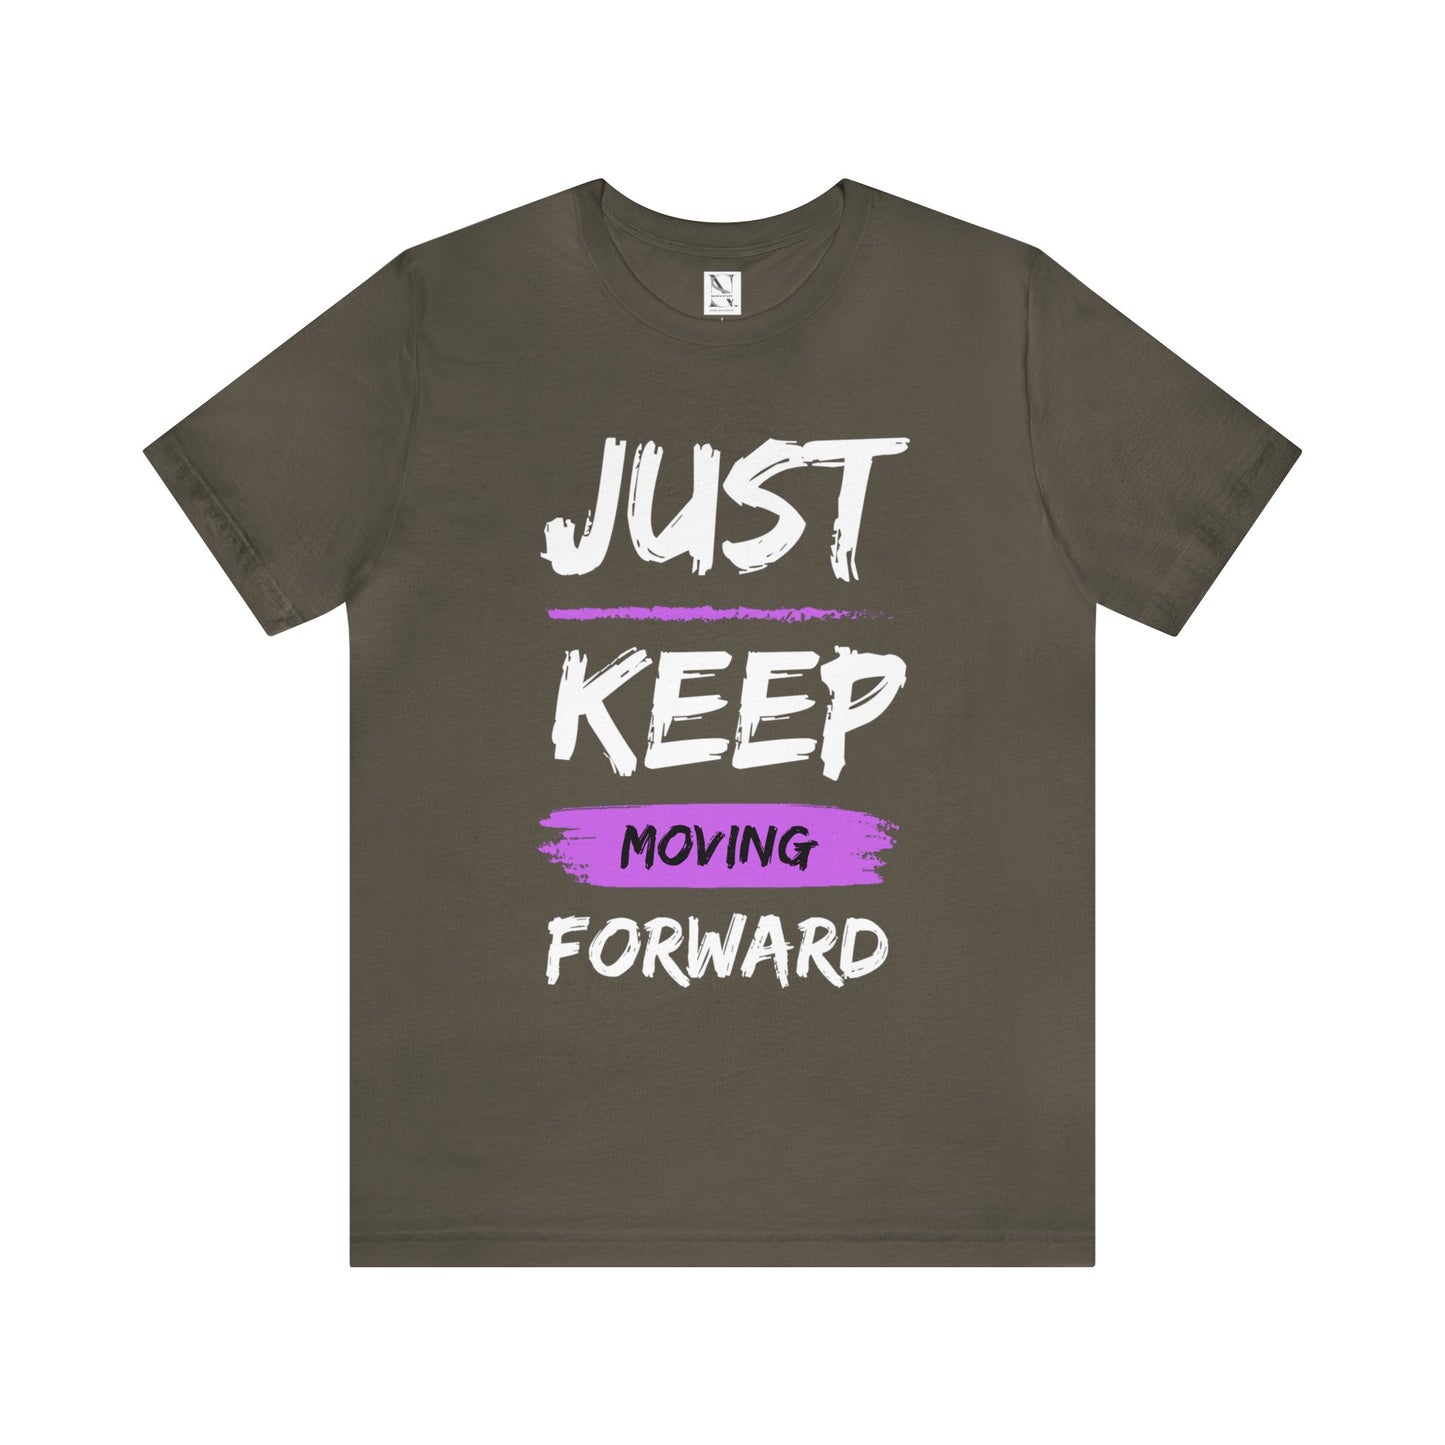 Just Keep Moving Forward, Jersey Tee